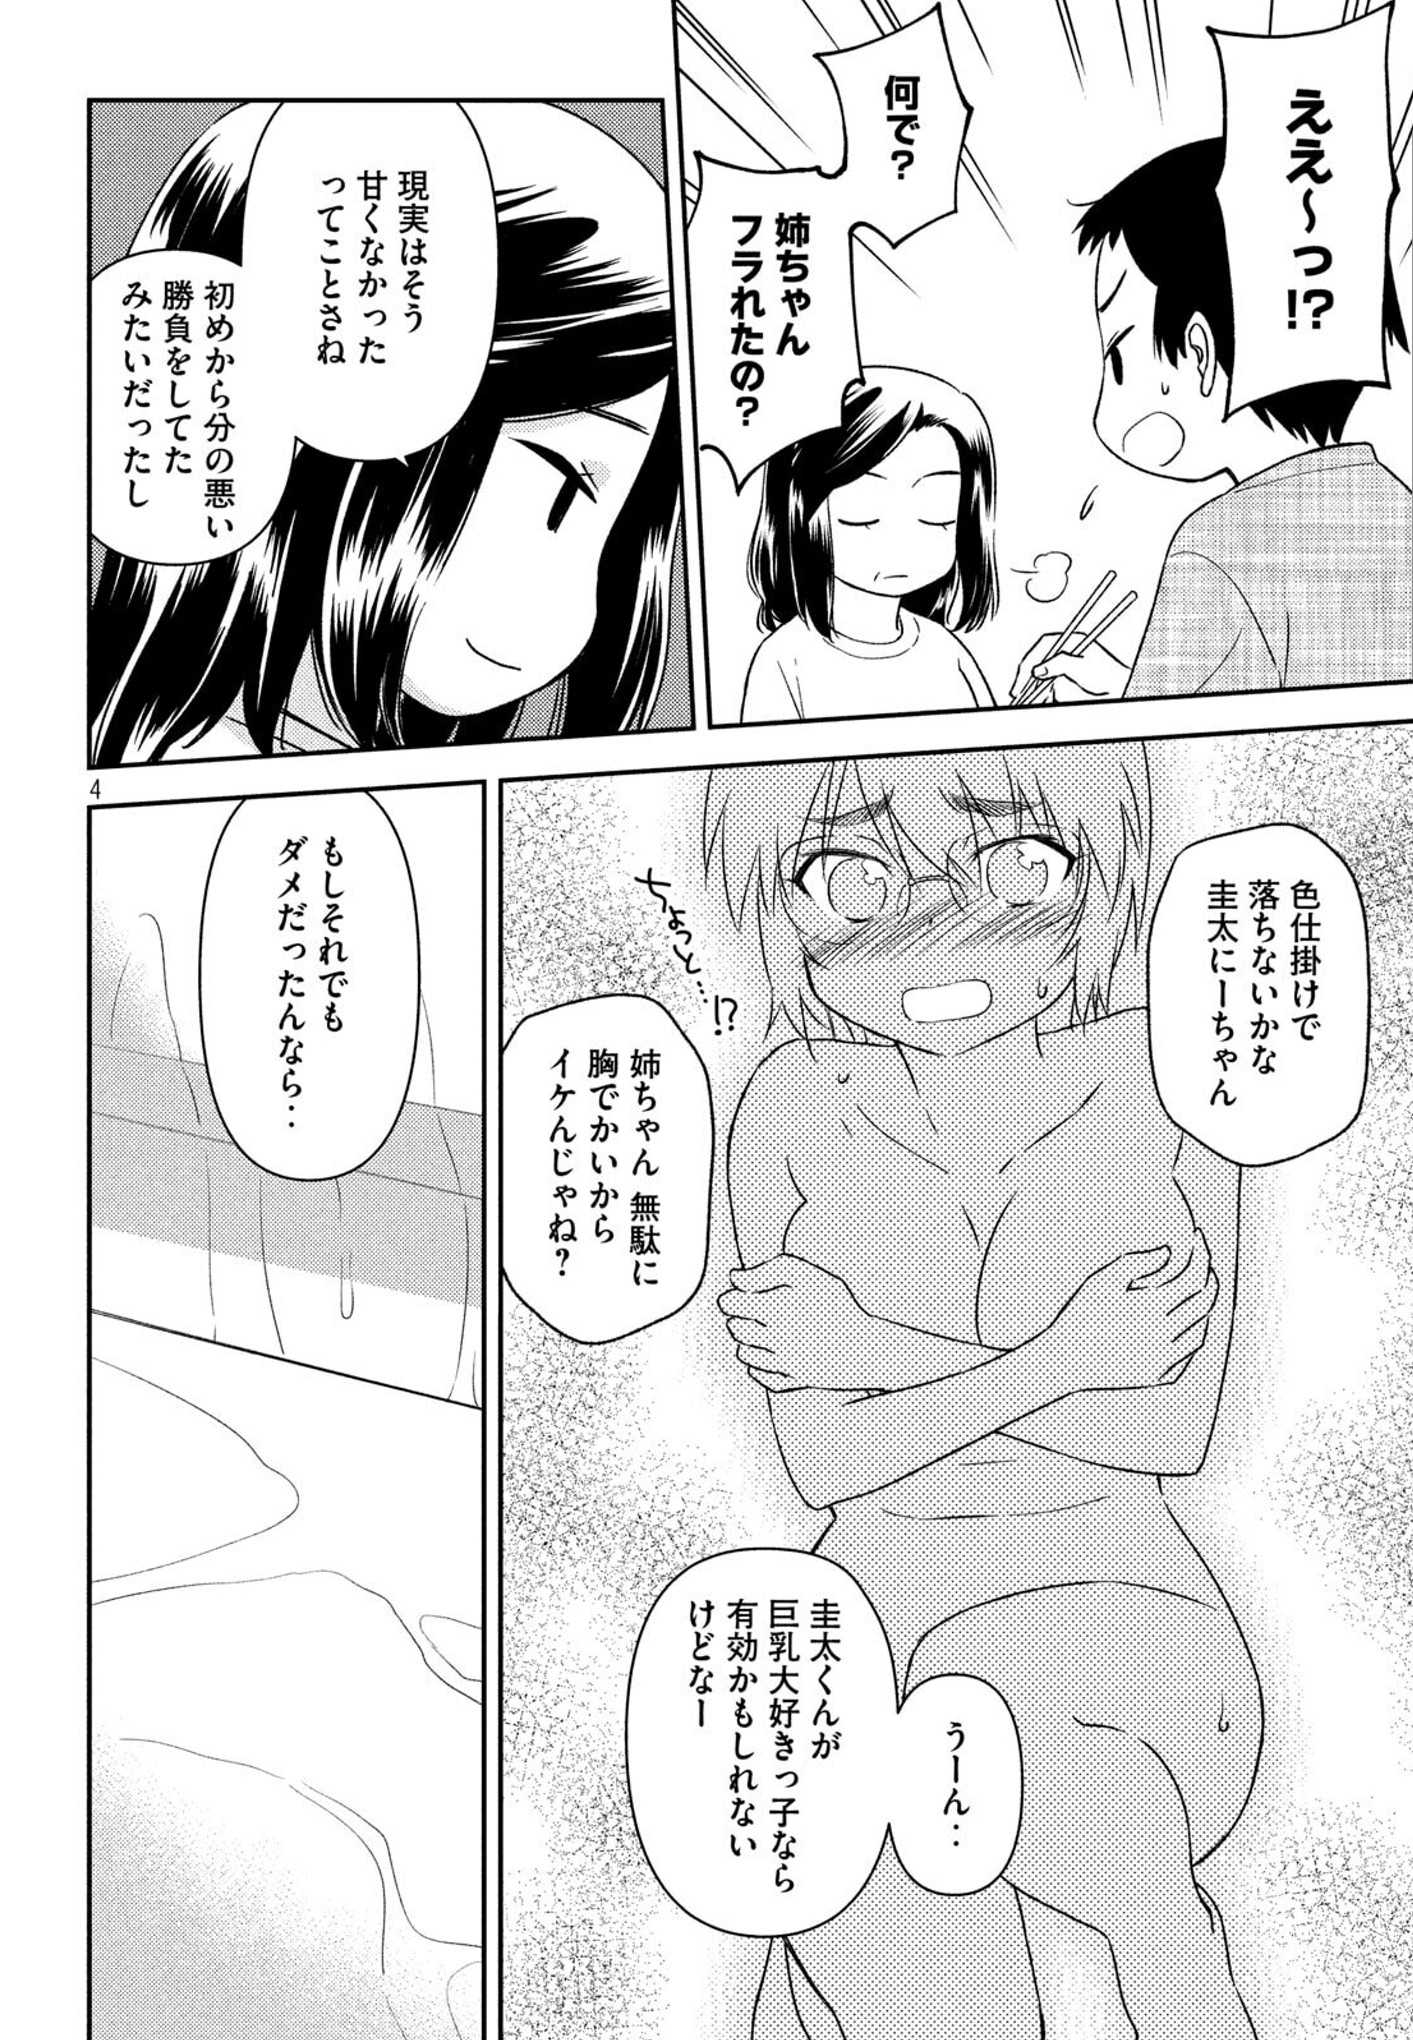 Kiss x Sis - Chapter 137 - Page 4